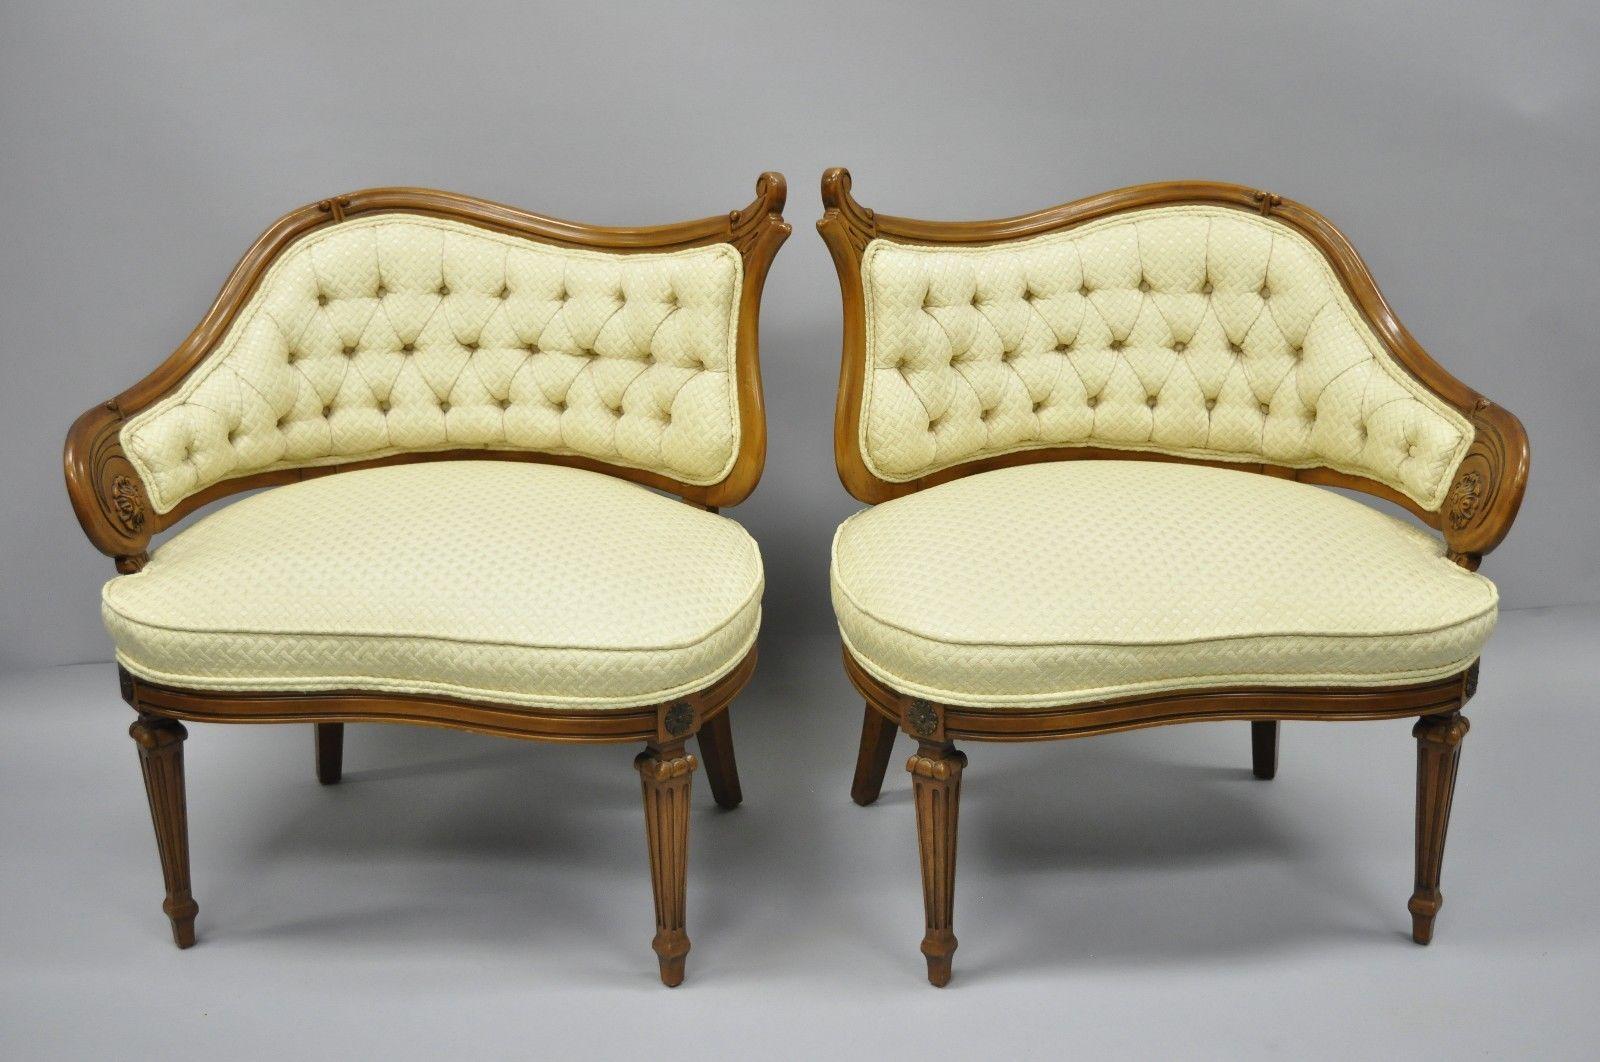 Pair of vintage yellow Hollywood Regency French style wingback lounge parlor chairs. Item features right and left wings, yellow upholstery, metal leg ormolu, solid wood construction, tapered legs, quality American craftsmanship, and great style and